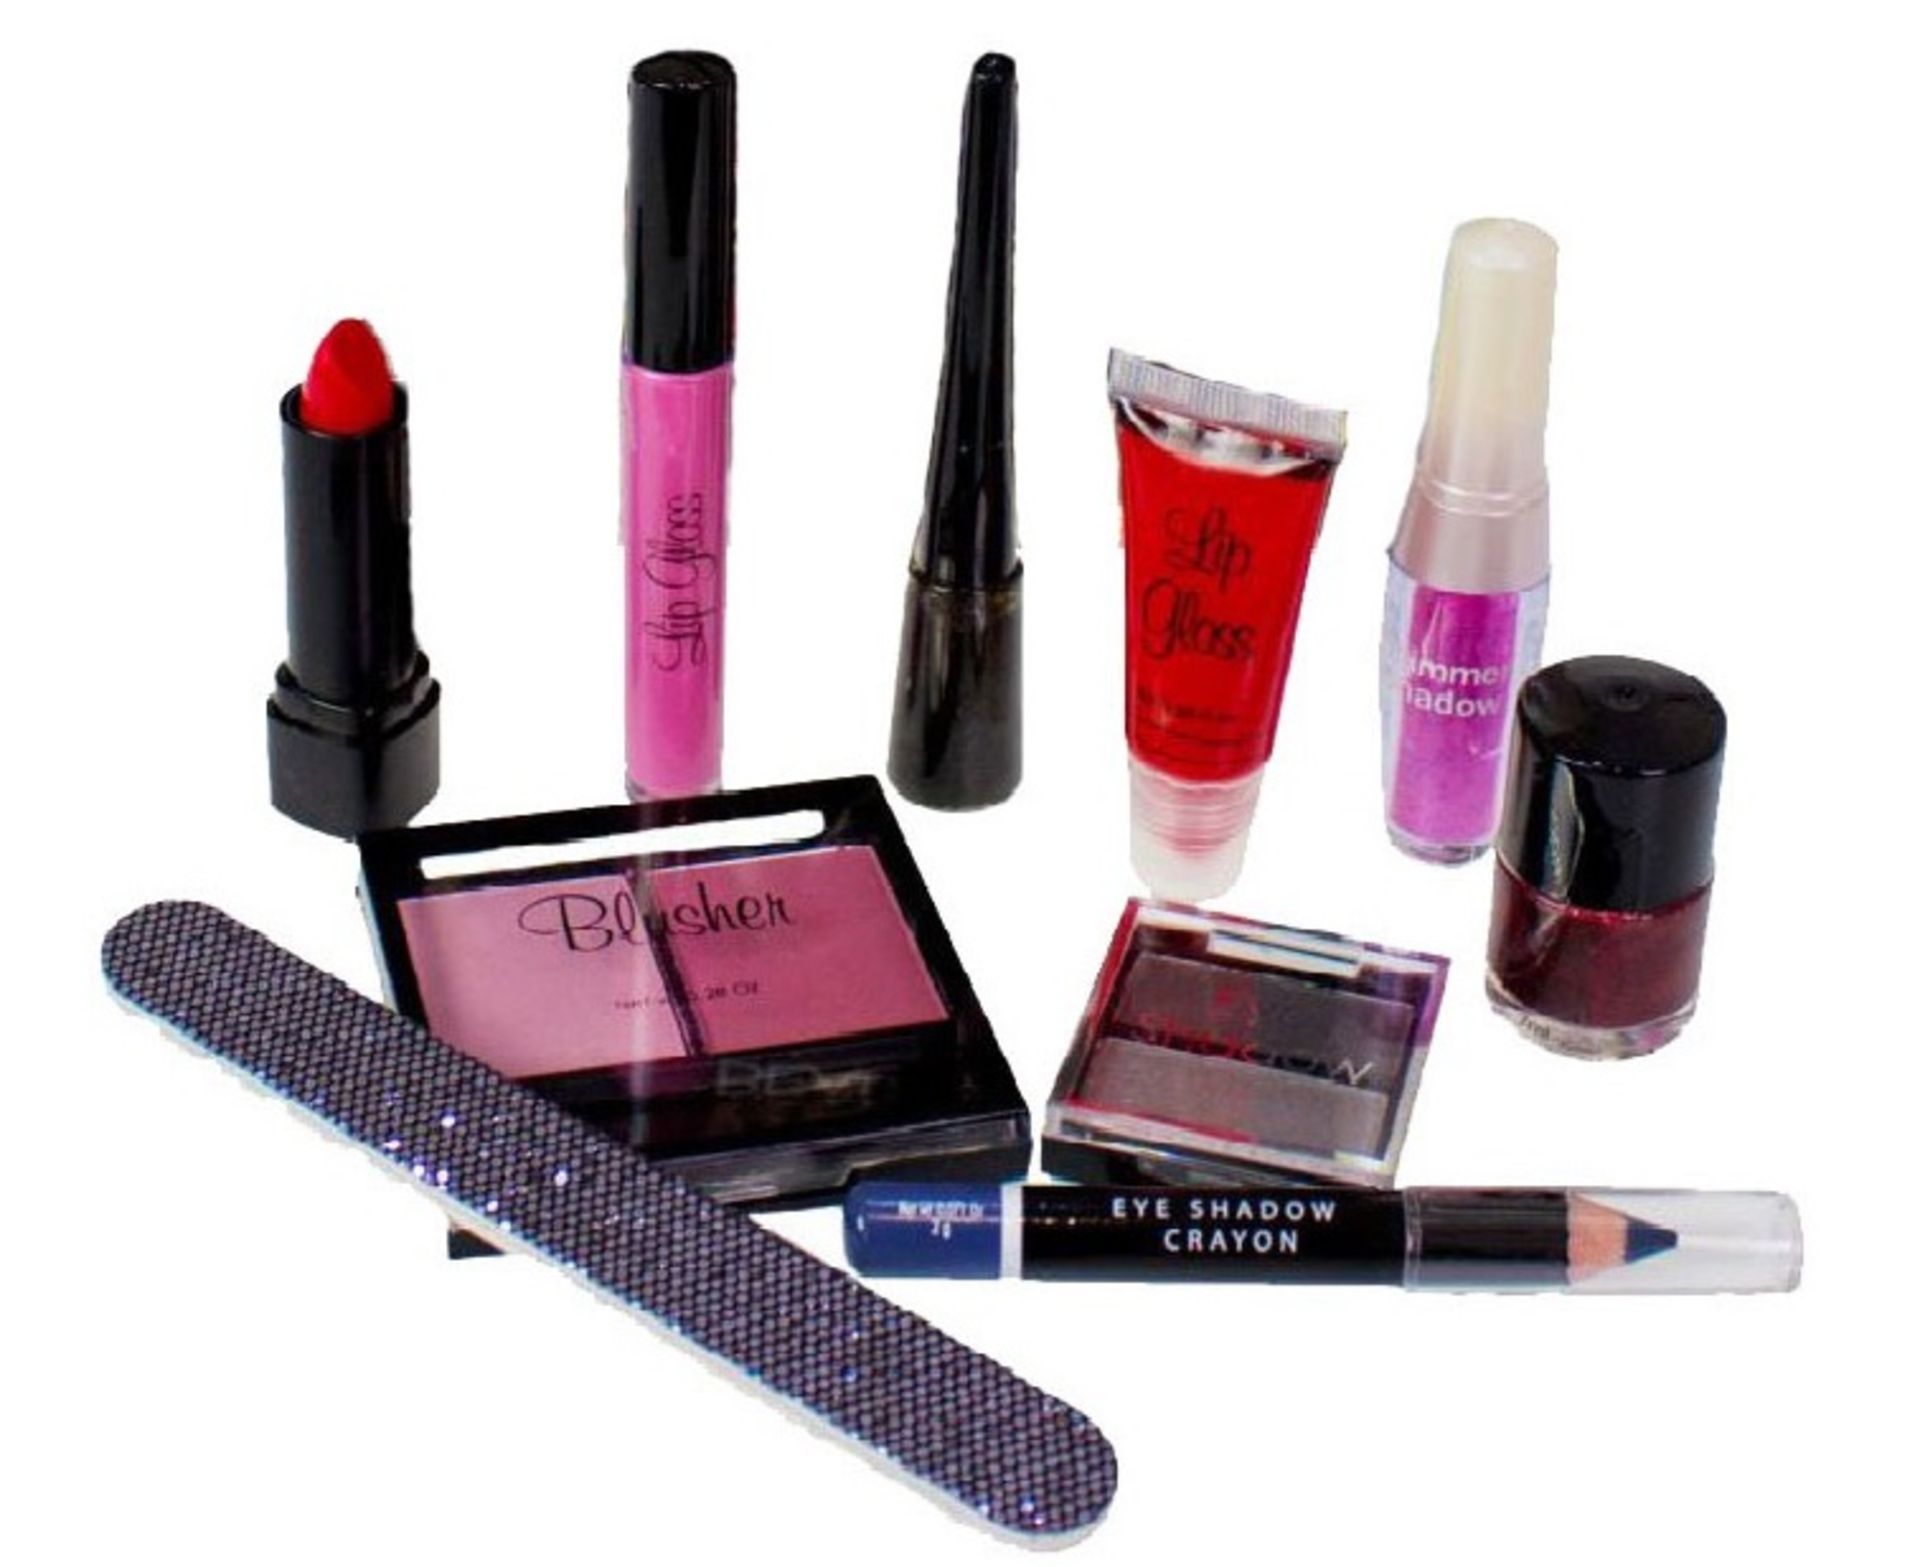 V Brand New Ten Beauty Product Selection in Gift Bag (Contents vary) X 2 YOUR BID PRICE TO BE